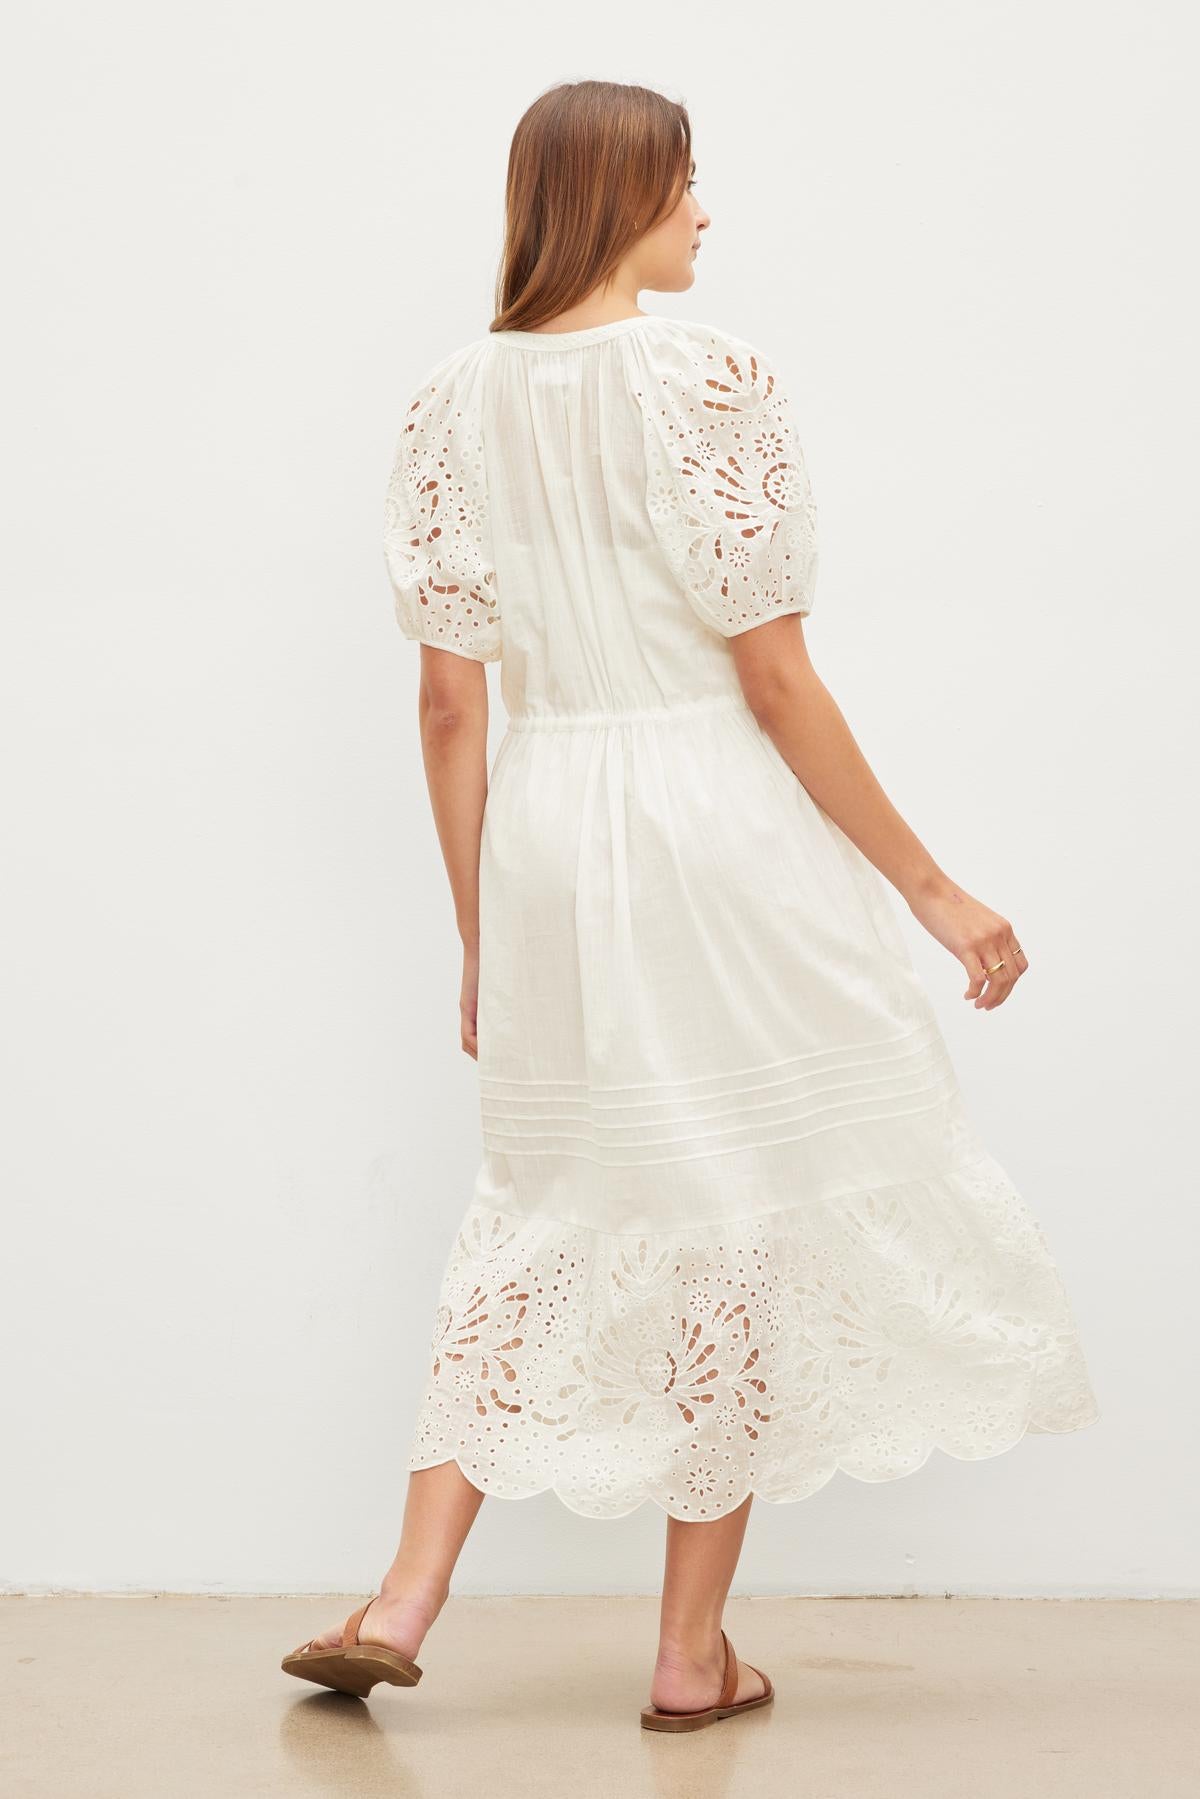 A woman standing facing away from the camera, wearing a white NADIA EMBROIDERED COTTON LACE DRESS with puffed sleeves, paired with brown flats.-36454007570625